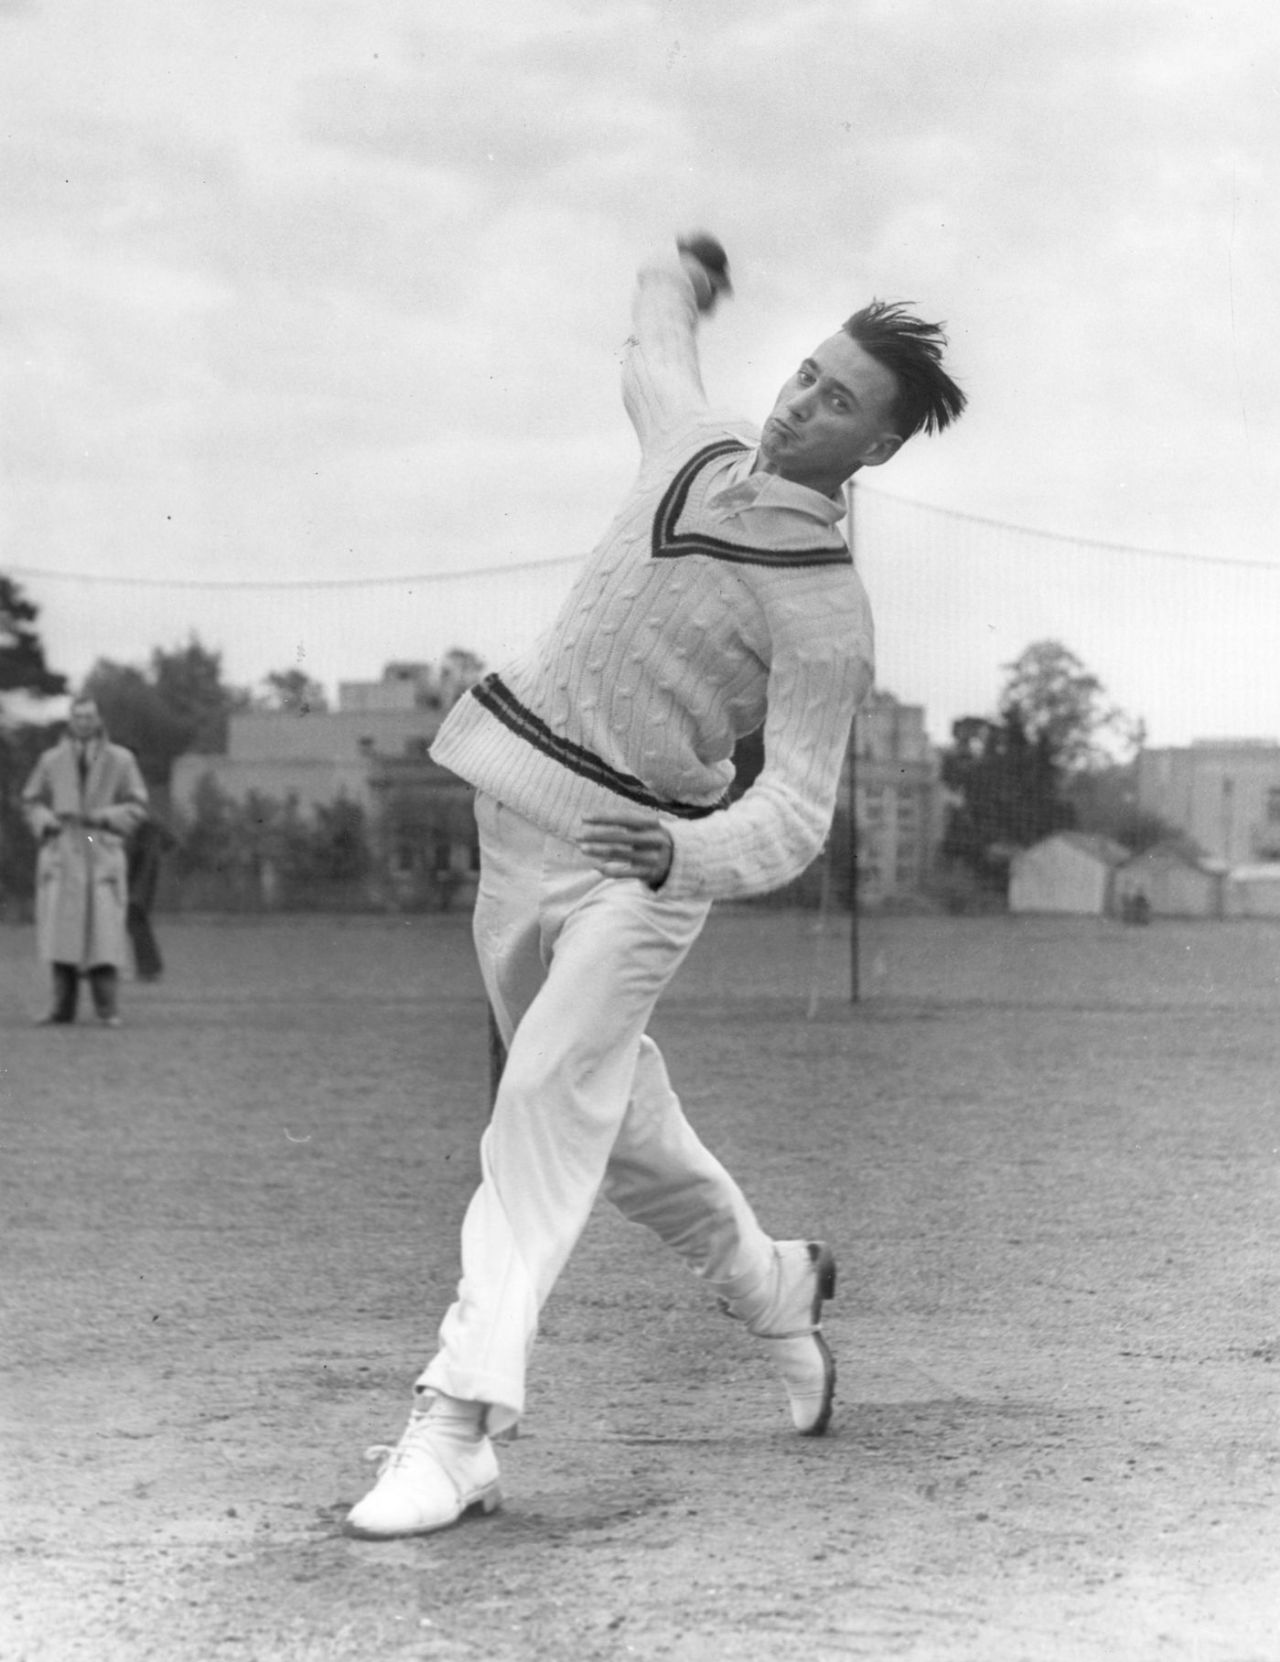 Hugh Tayfield of South Africa bowls in the nets, June 09, 1951
